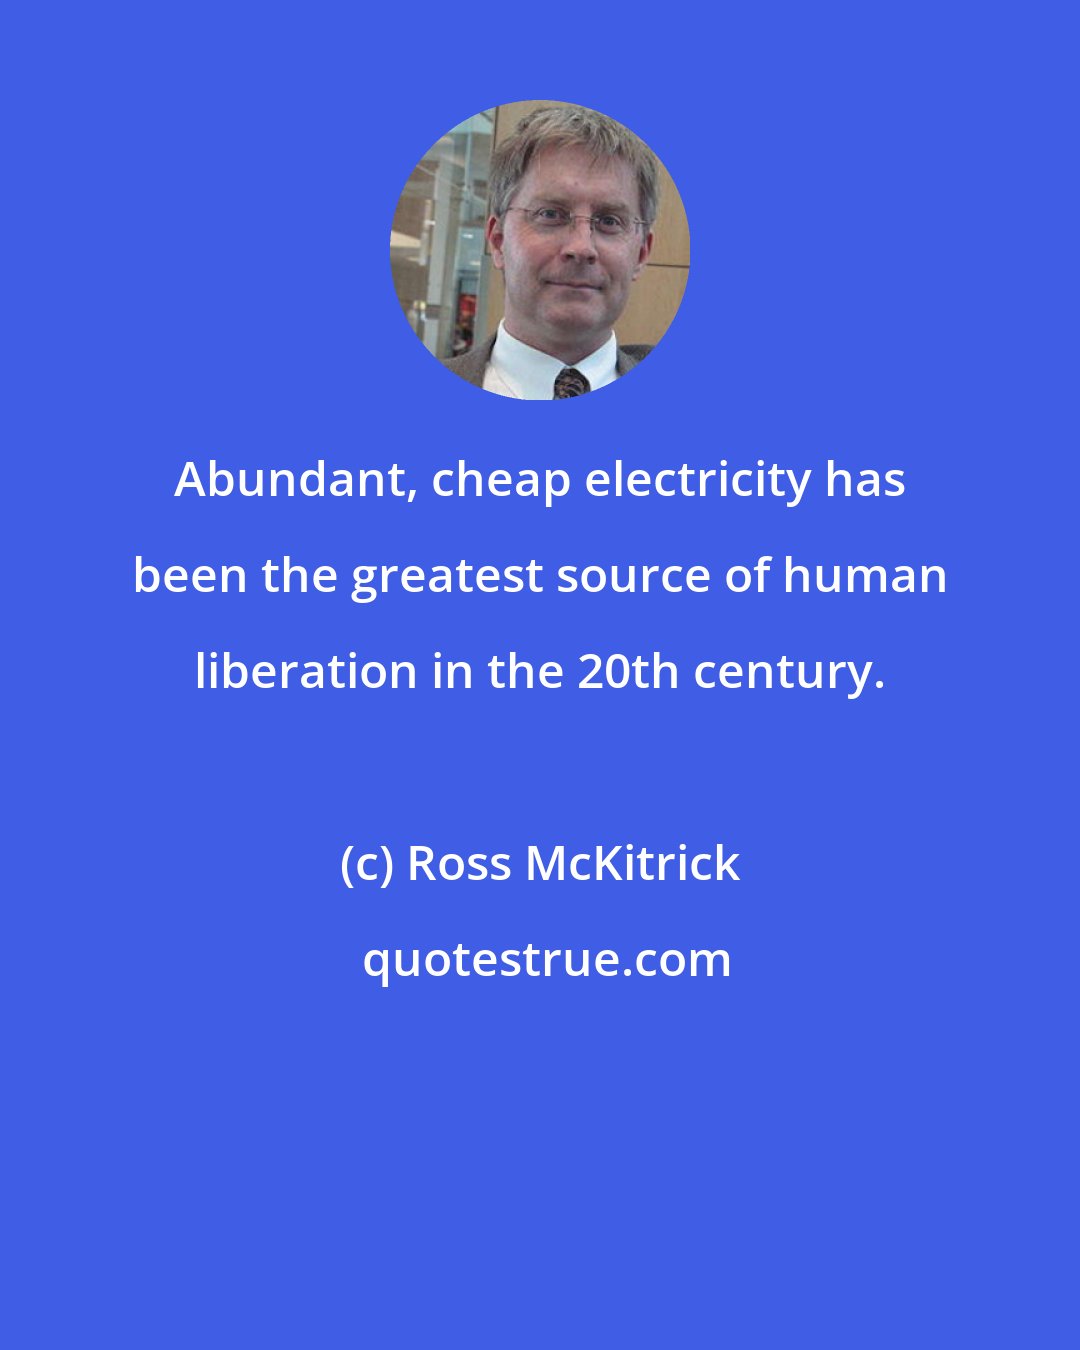 Ross McKitrick: Abundant, cheap electricity has been the greatest source of human liberation in the 20th century.